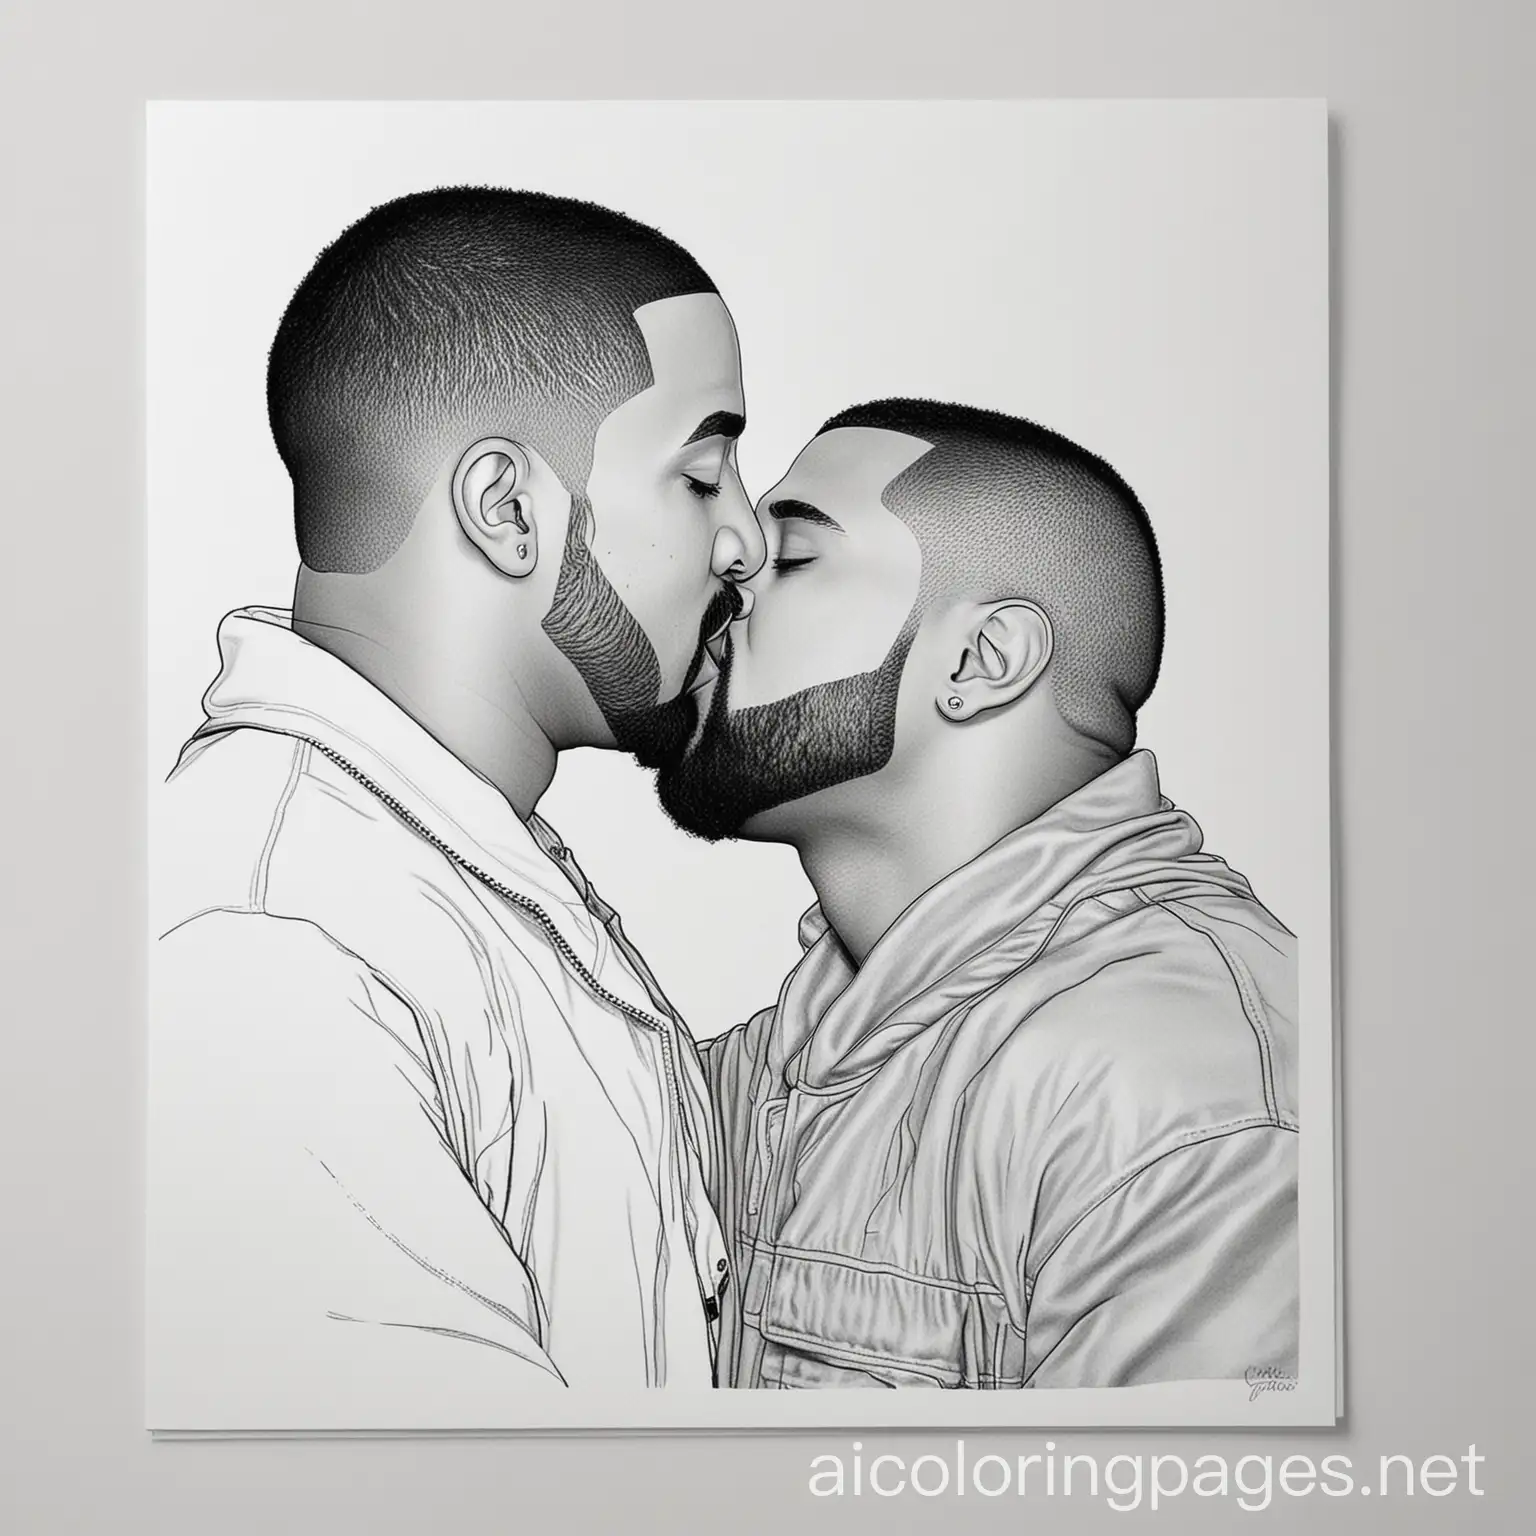 drake and kanye kissing



, Coloring Page, black and white, line art, white background, Simplicity, Ample White Space. The background of the coloring page is plain white to make it easy for young children to color within the lines. The outlines of all the subjects are easy to distinguish, making it simple for kids to color without too much difficulty